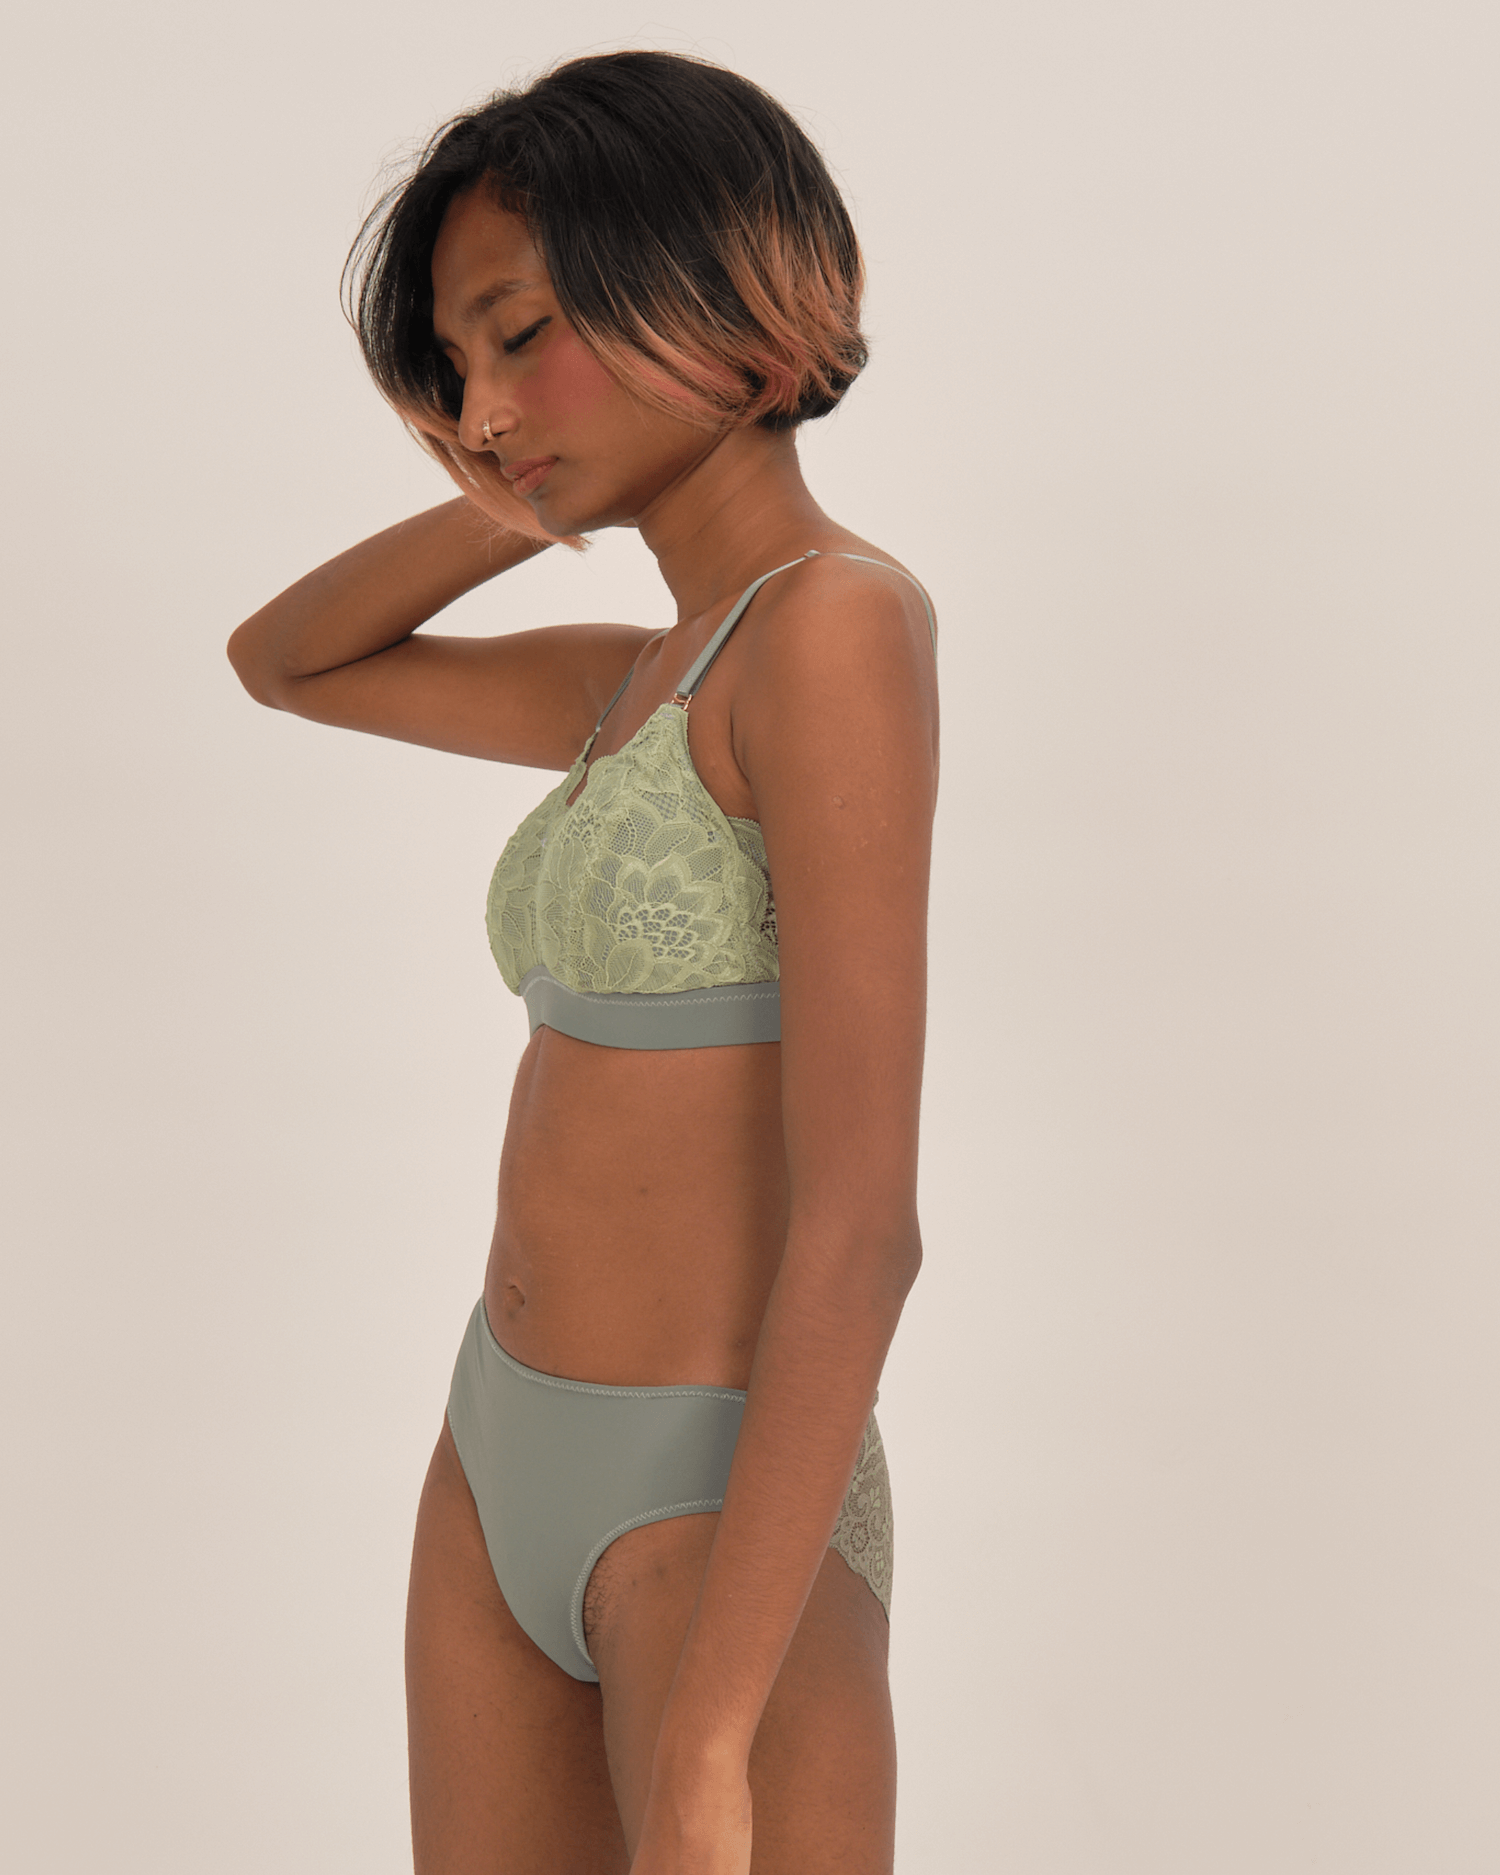 CITRONTART — VENUS BRALETTE my first piece of cc for the new